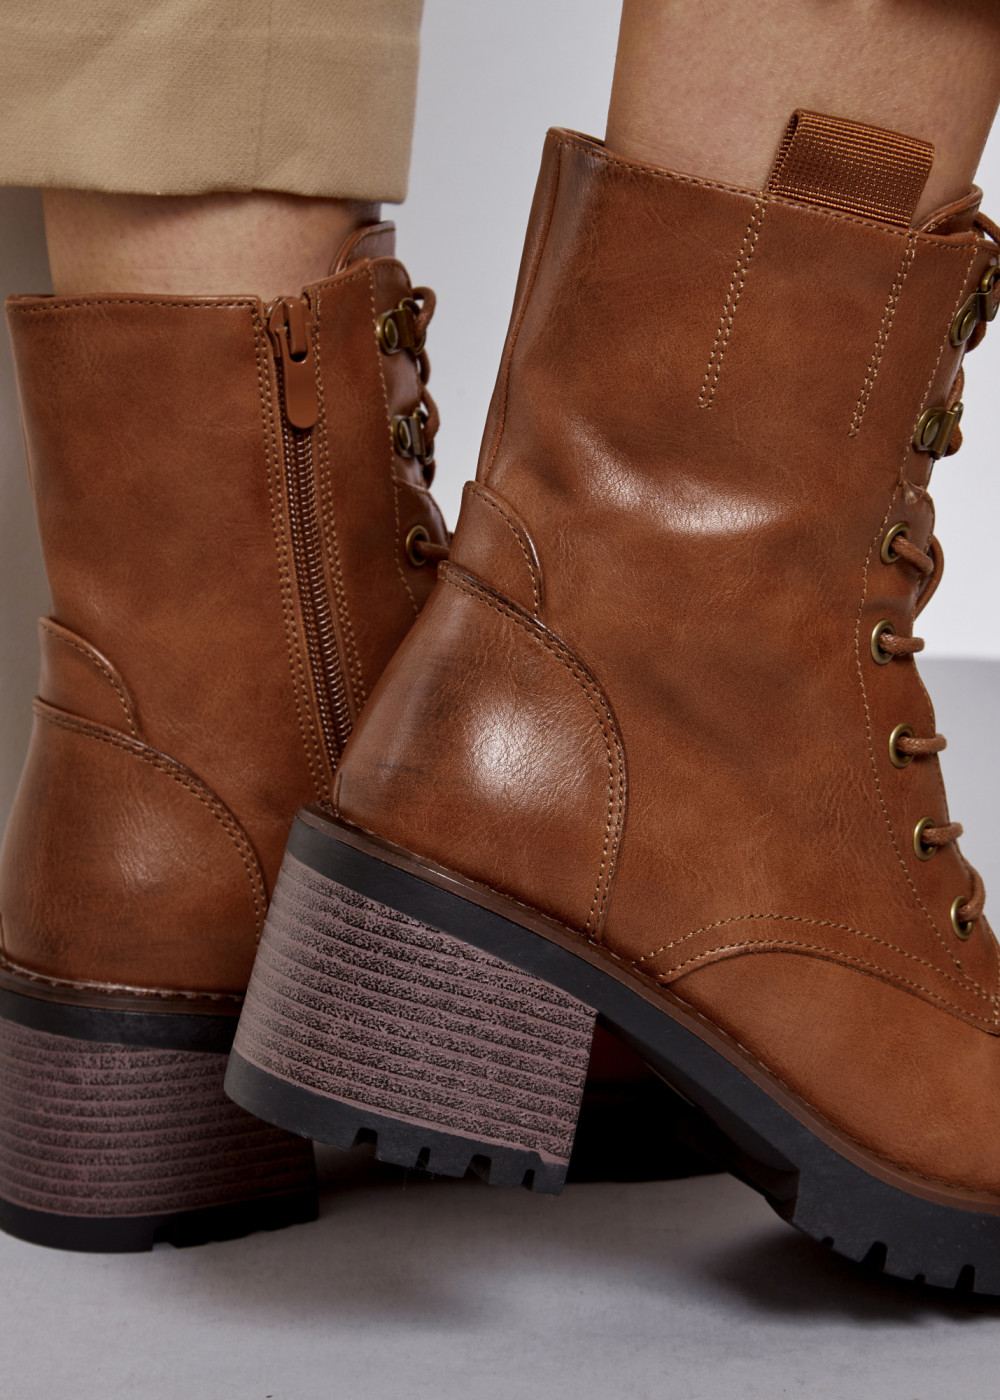 Brown tan lace up heeled ankle boots 2